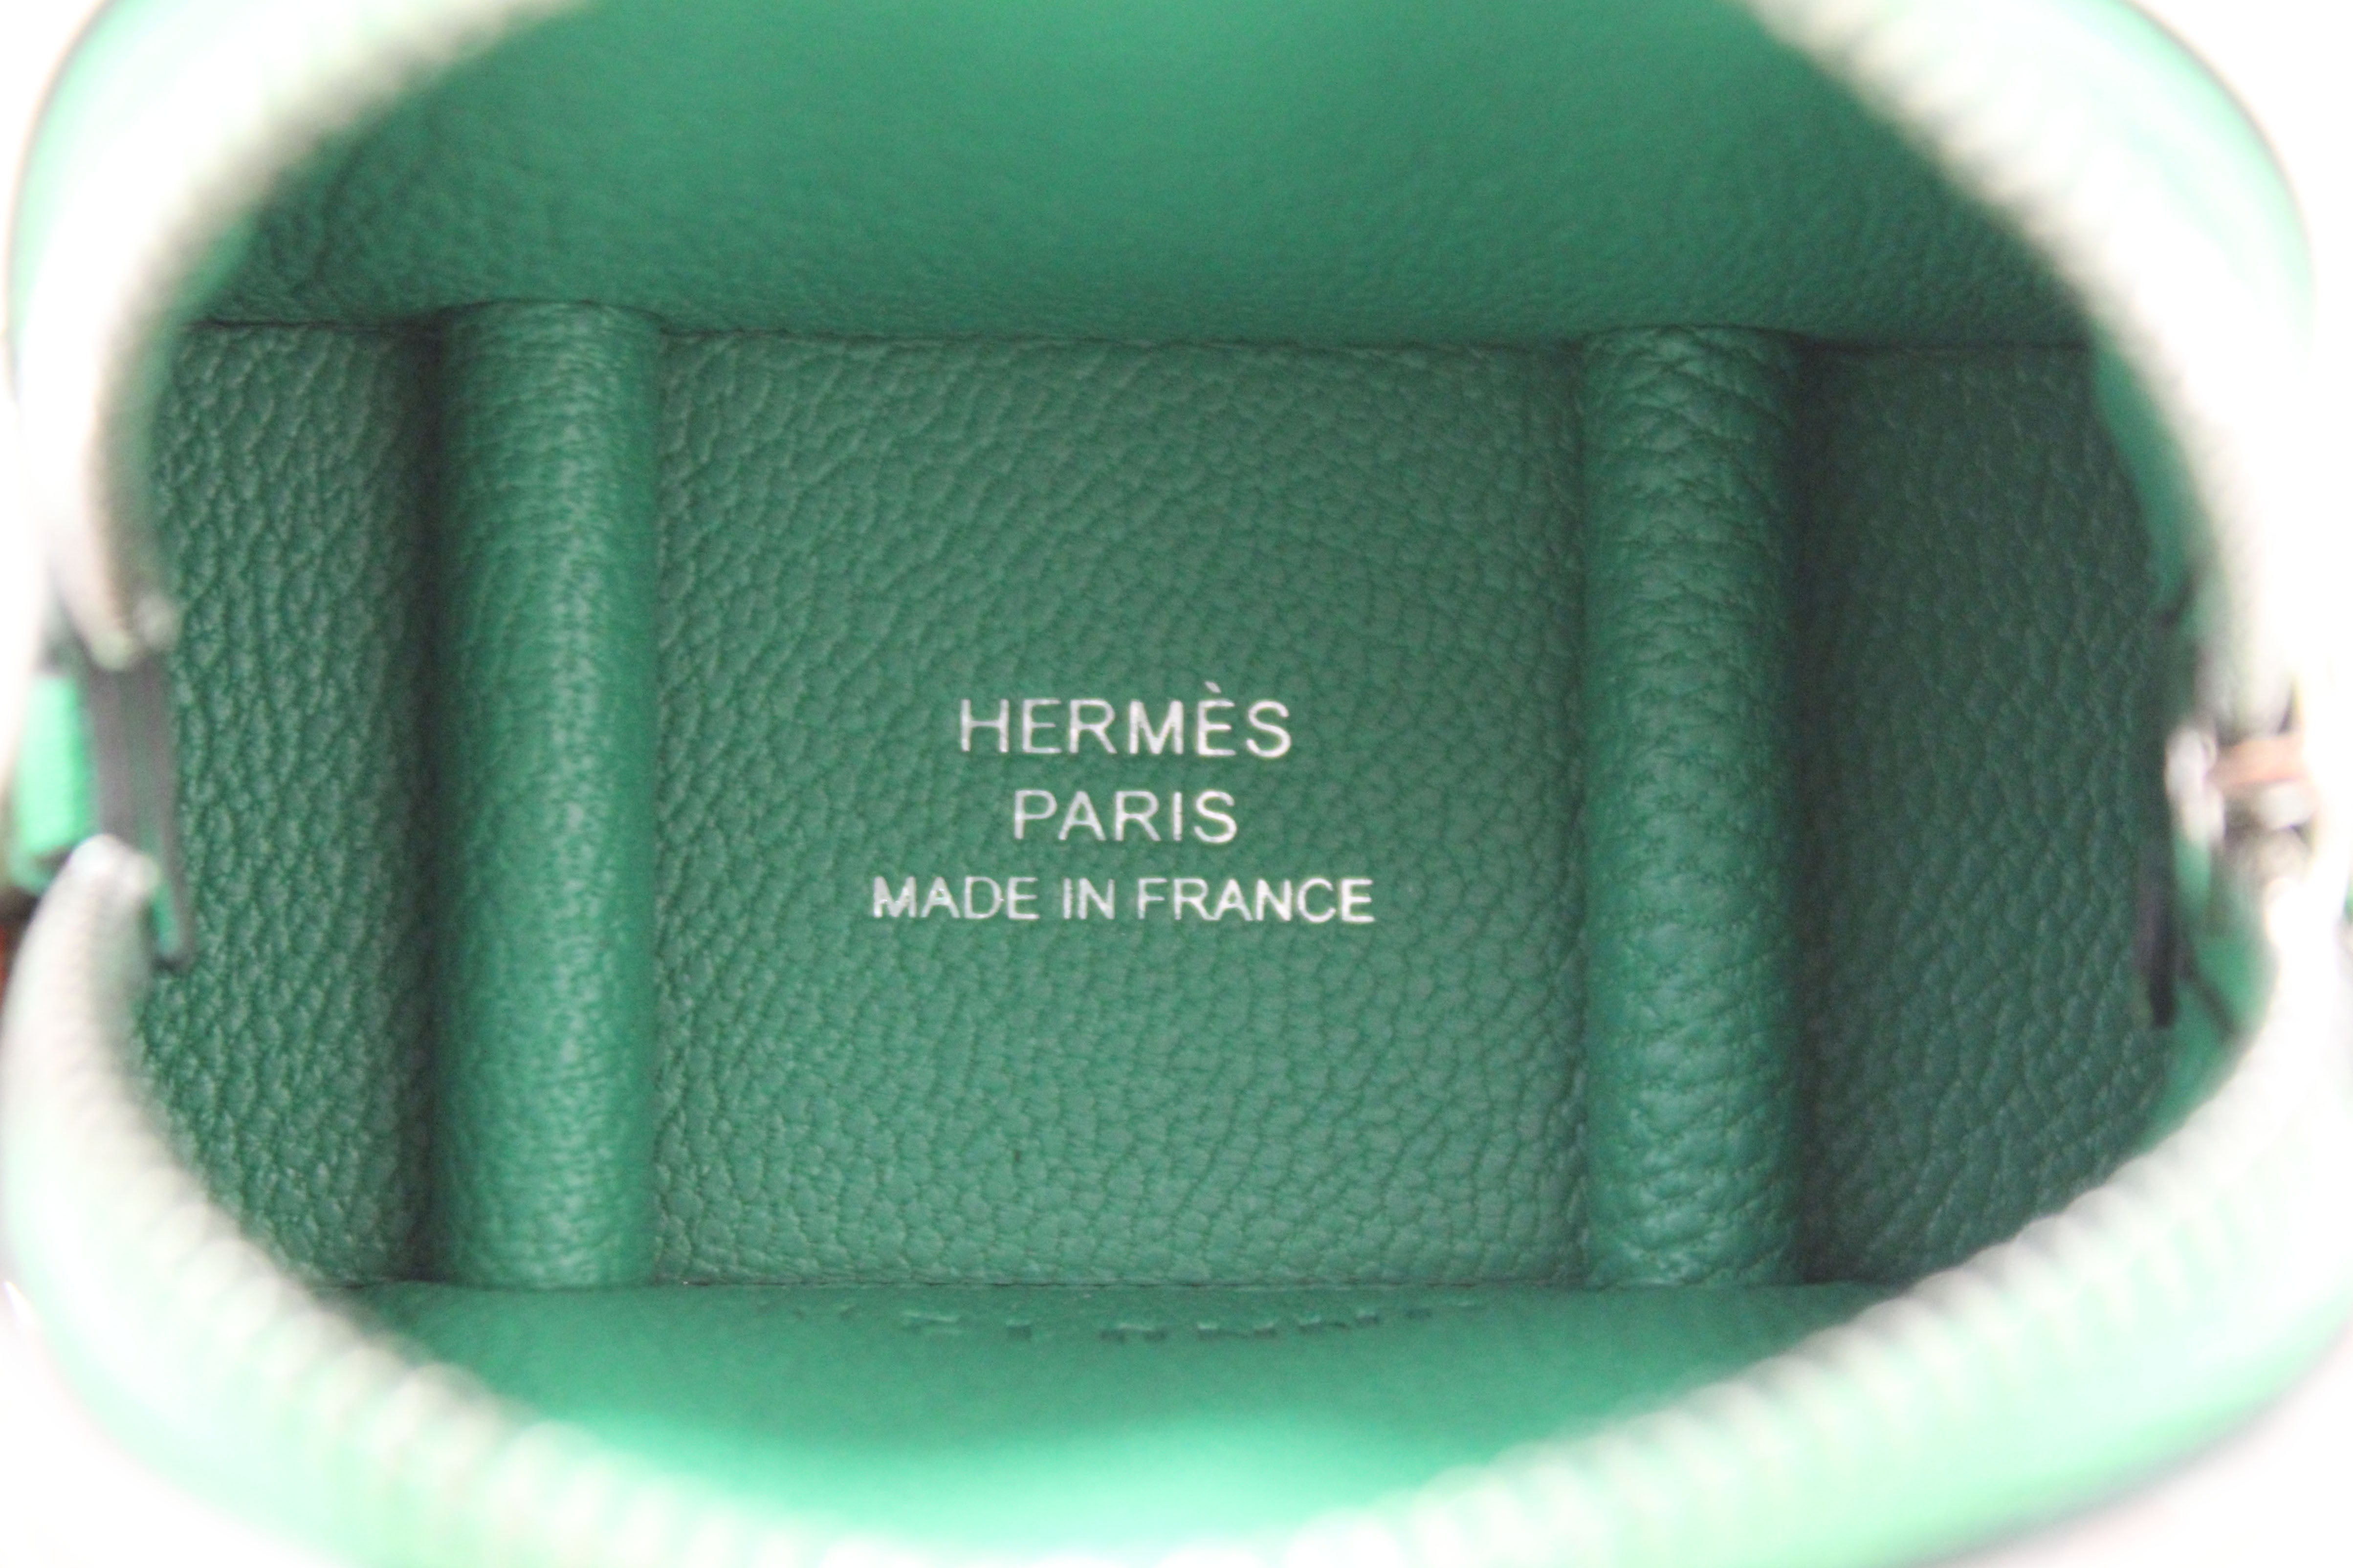 Authentic Hermes Green Bolide on Wheels Bag Strap Charm